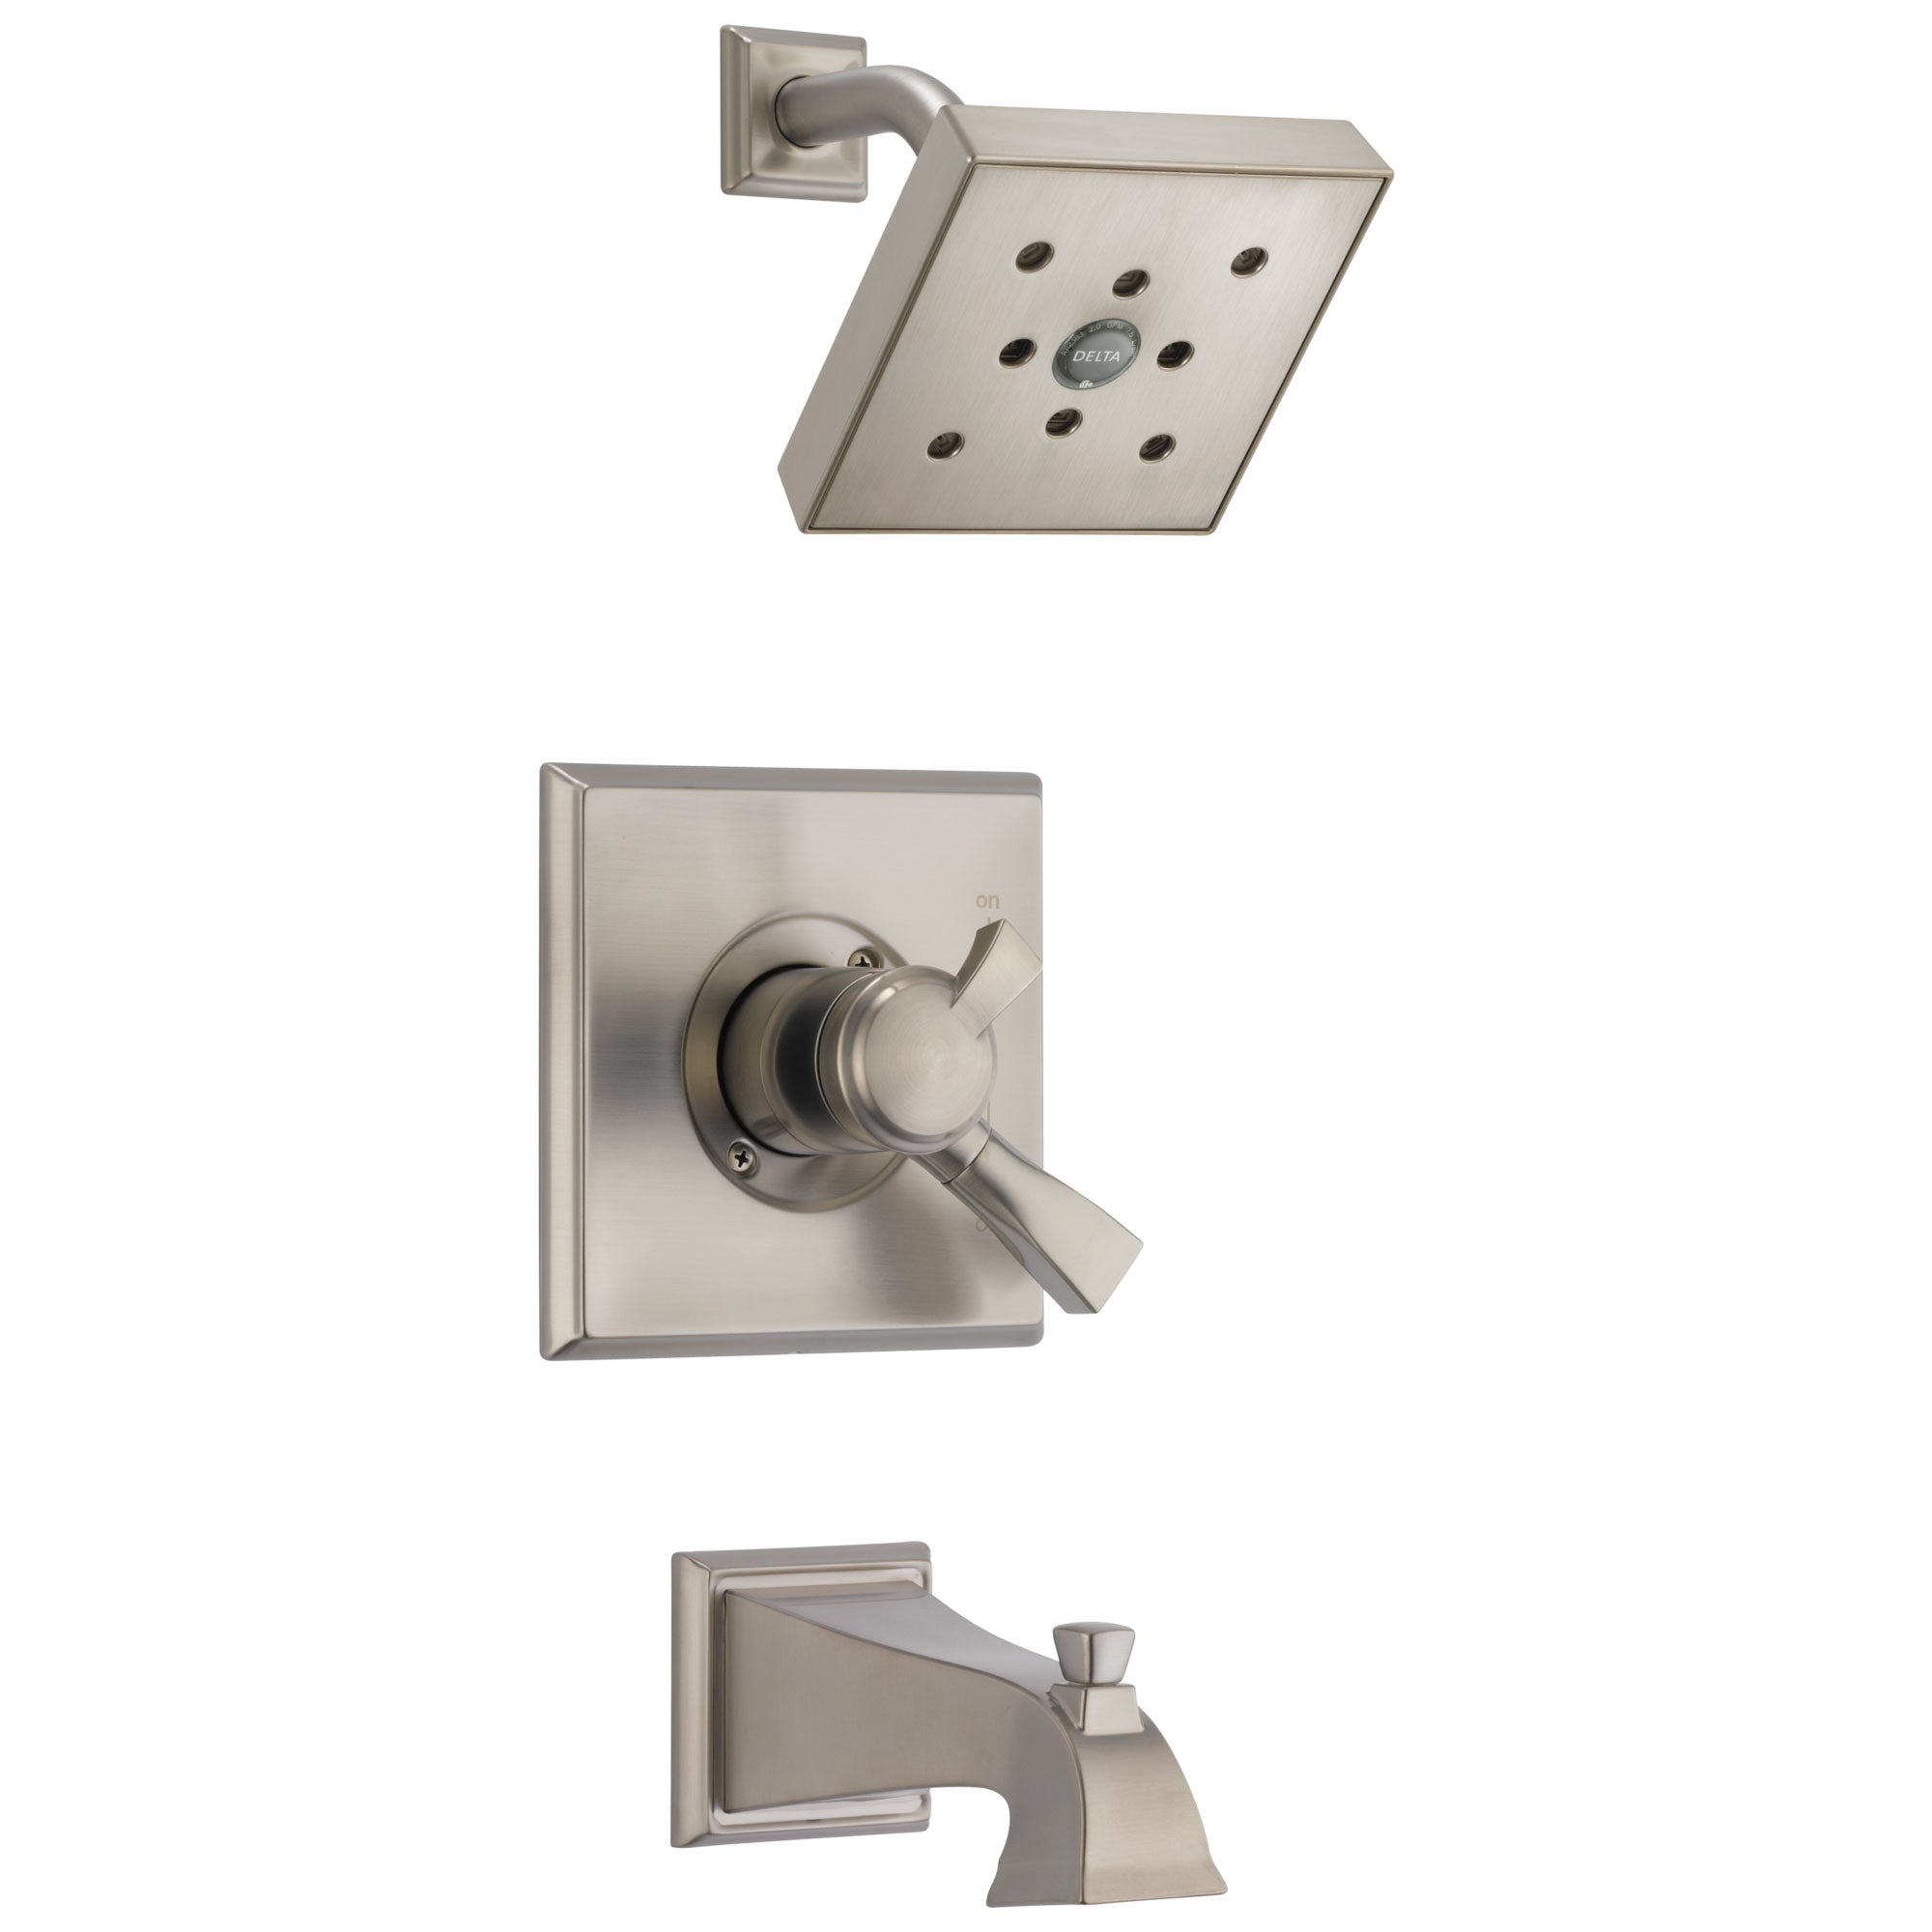 Delta Dryden Collection Stainless Steel Finish Monitor 17 Water Efficient Dual Control Tub and Shower Combination Trim (Requires Valve) DT17451SPH2O